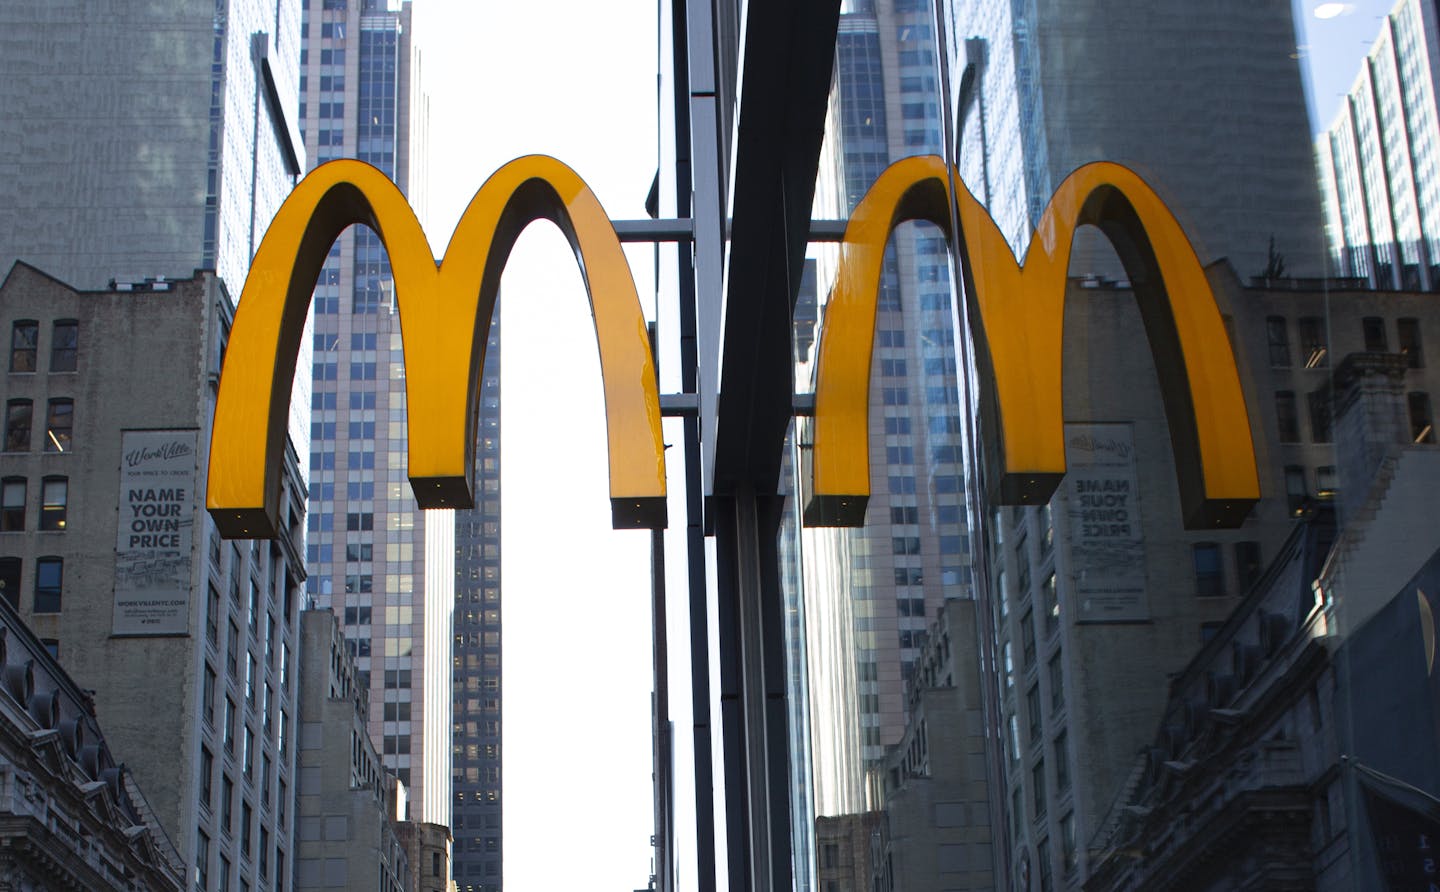 McDonald's golden arches sign in New York City.